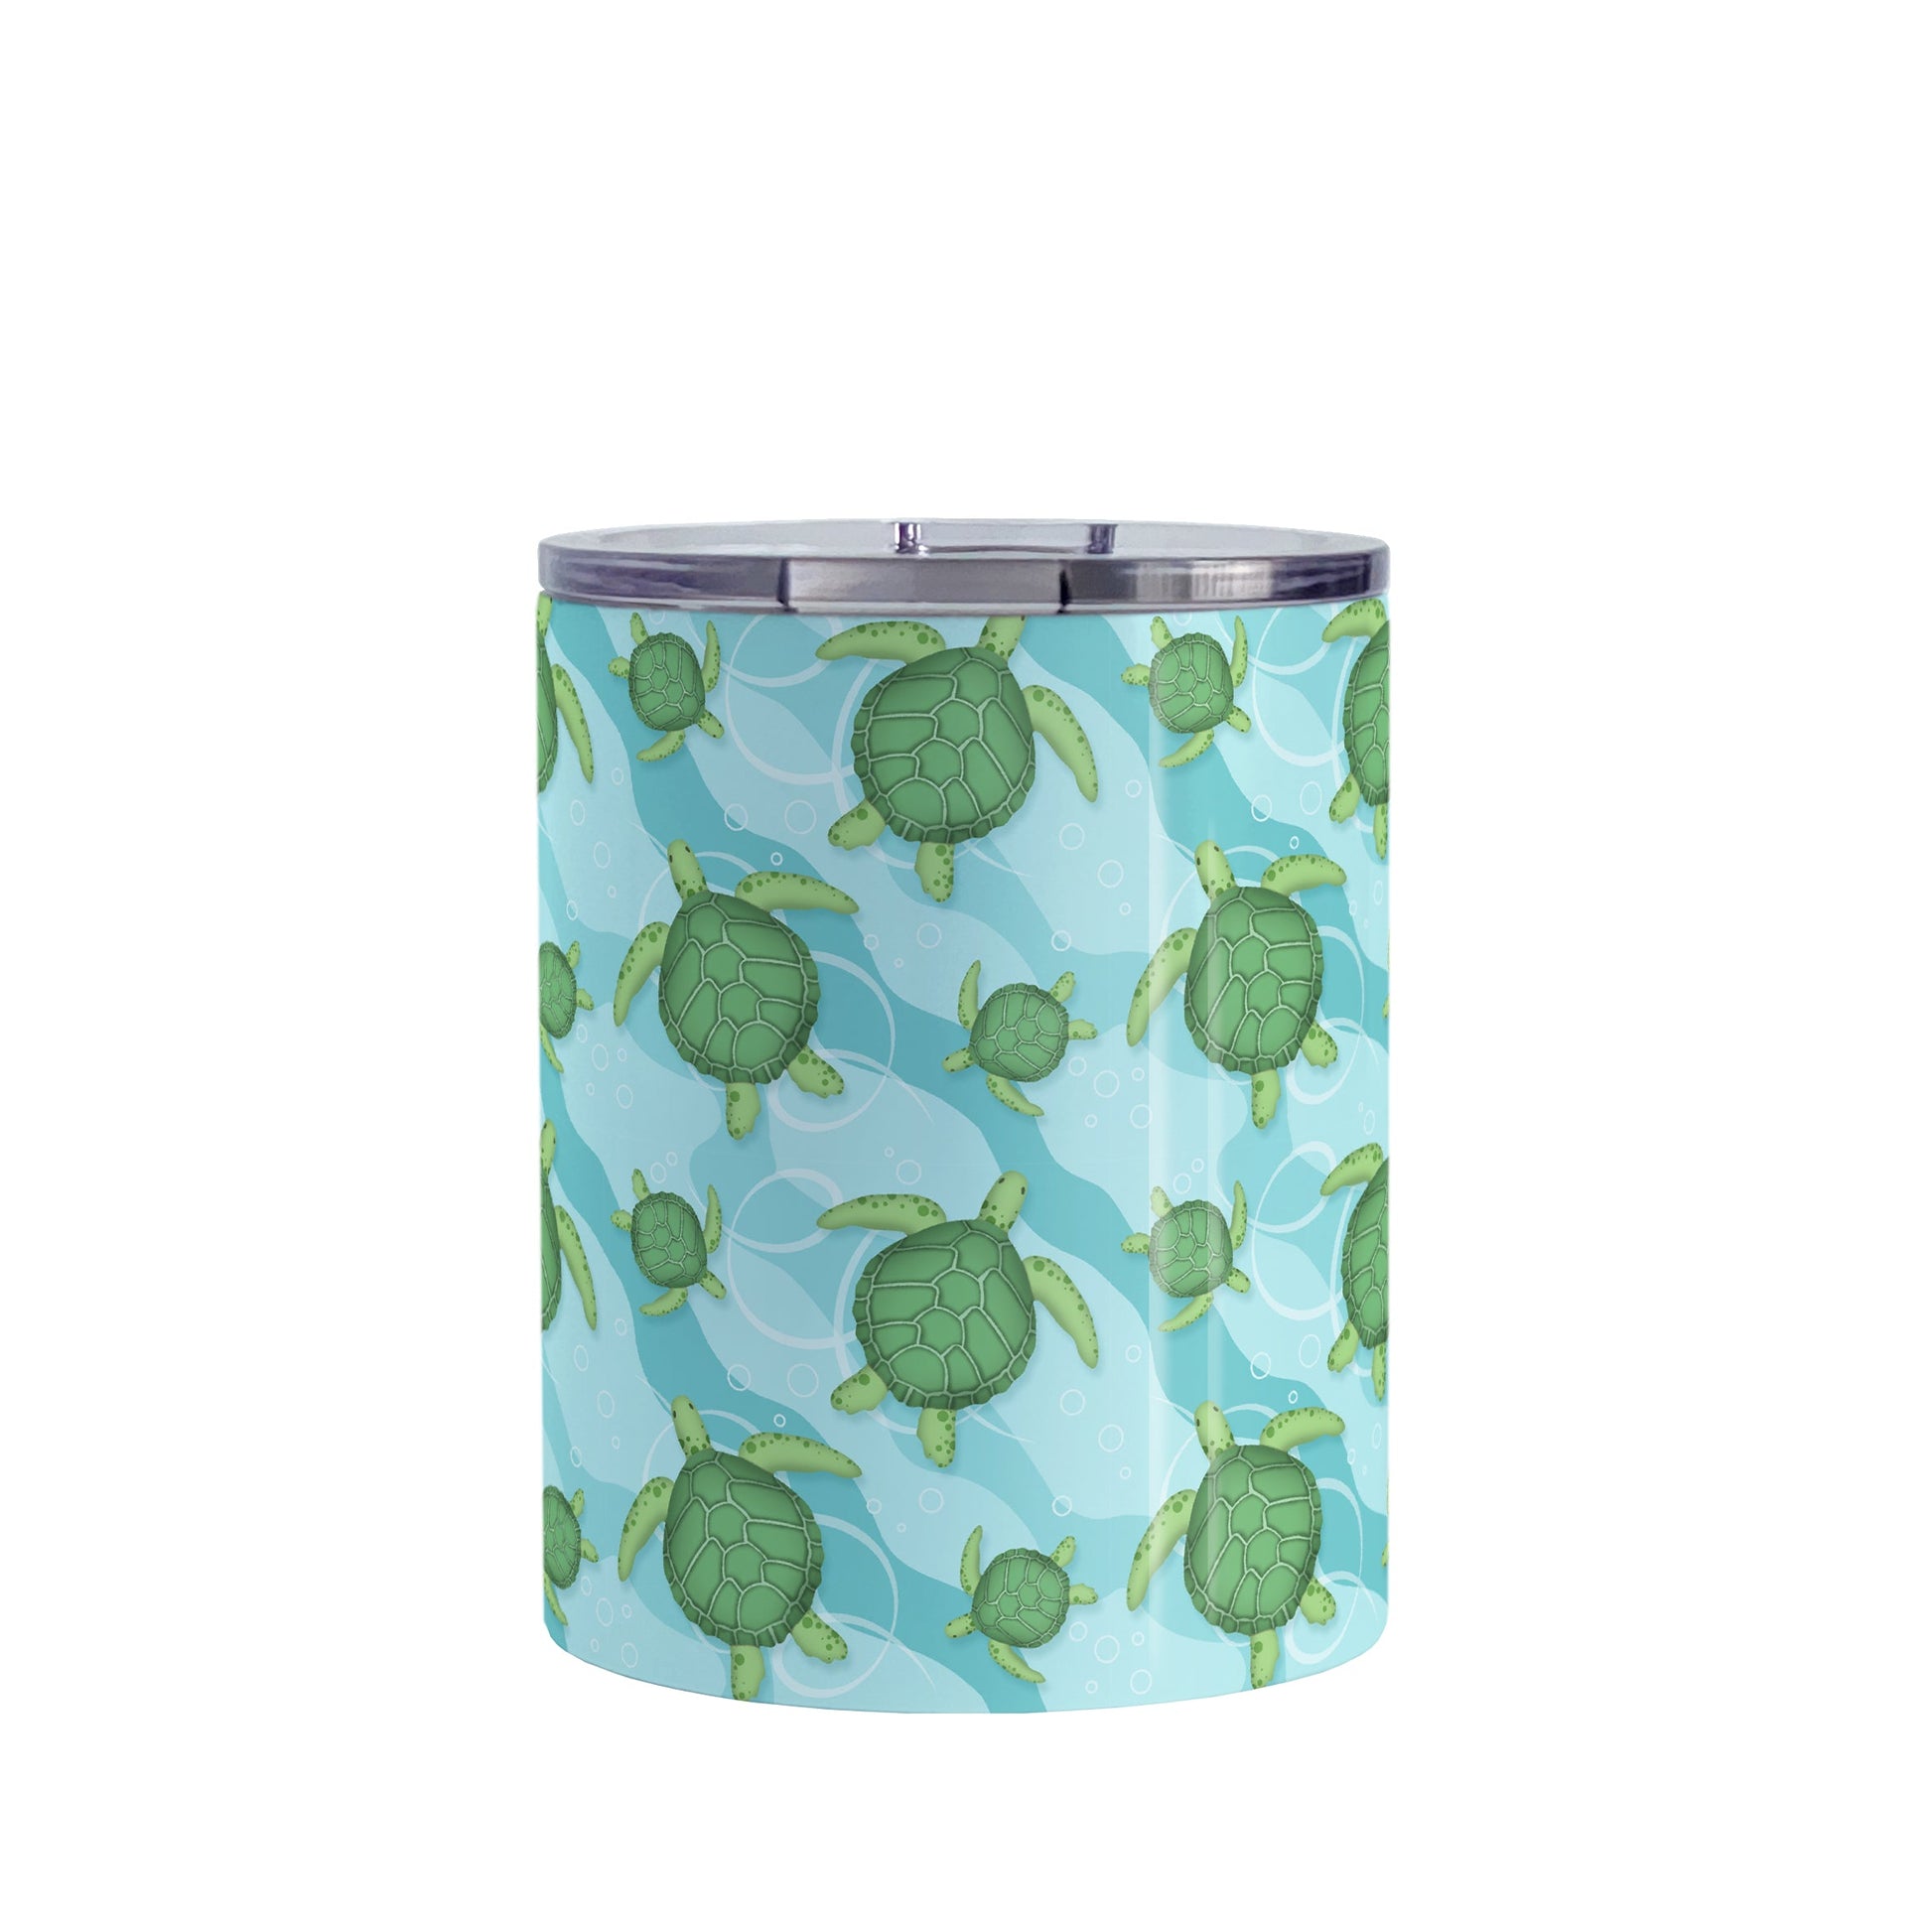 Aquatic Sea Turtle Pattern Tumbler Cup (10oz, stainless steel insulated) at Amy's Coffee Mugs. A sea turtle tumbler cup with an aquatic pattern of green sea turtles, swimming over a wavy underwater pattern design in blue and turquoise, that wraps around the cup.